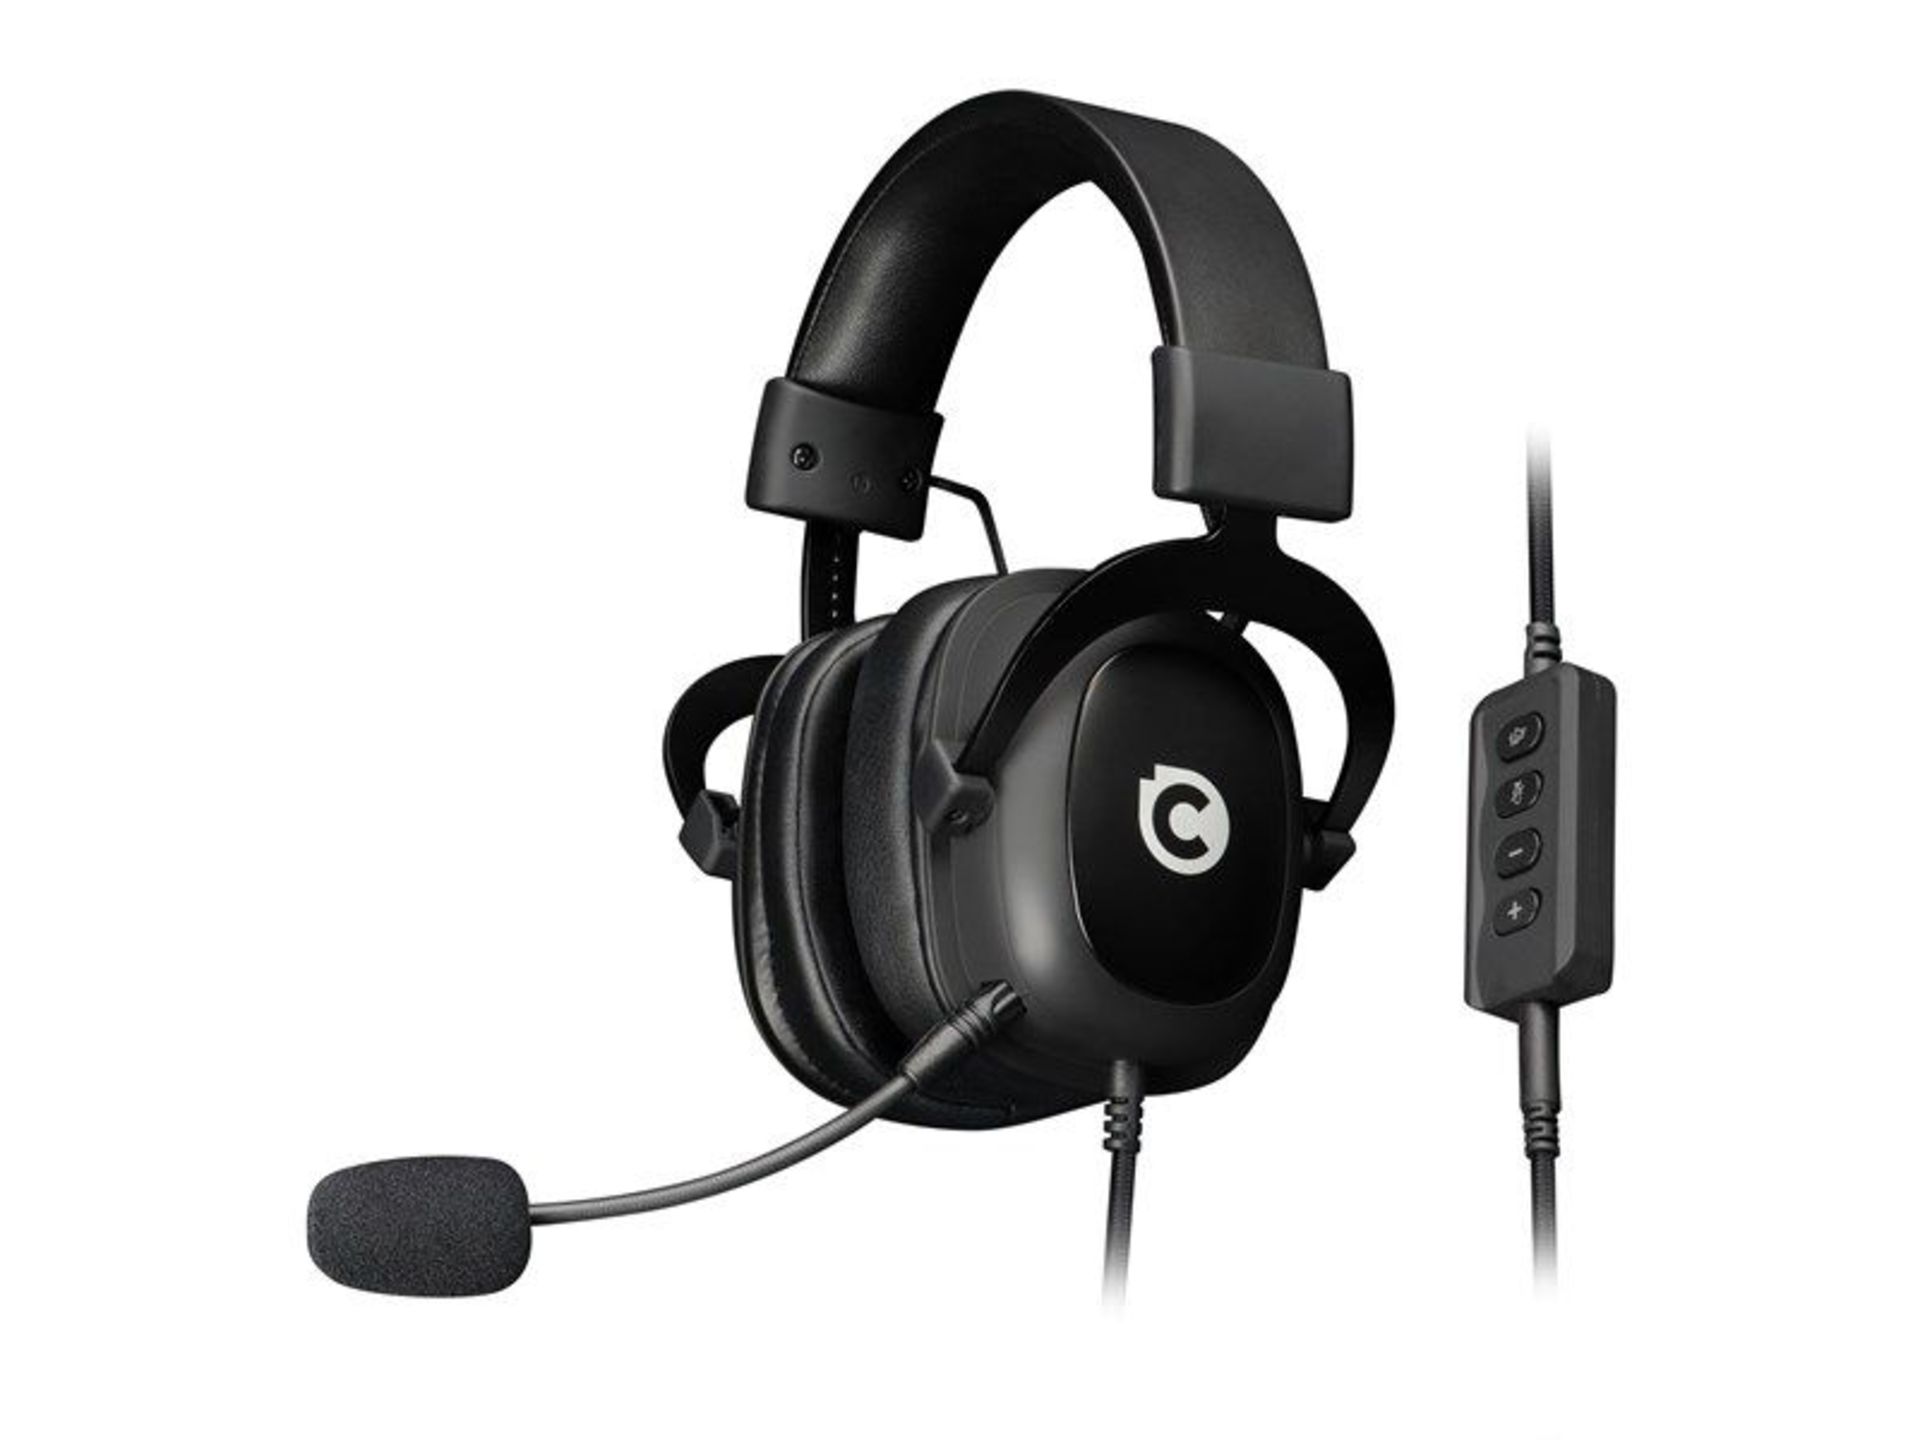 Chillblast Vox Surround Sound Gaming Headset with Noise-Cancelling Mic. - P6. Hear enemy footsteps